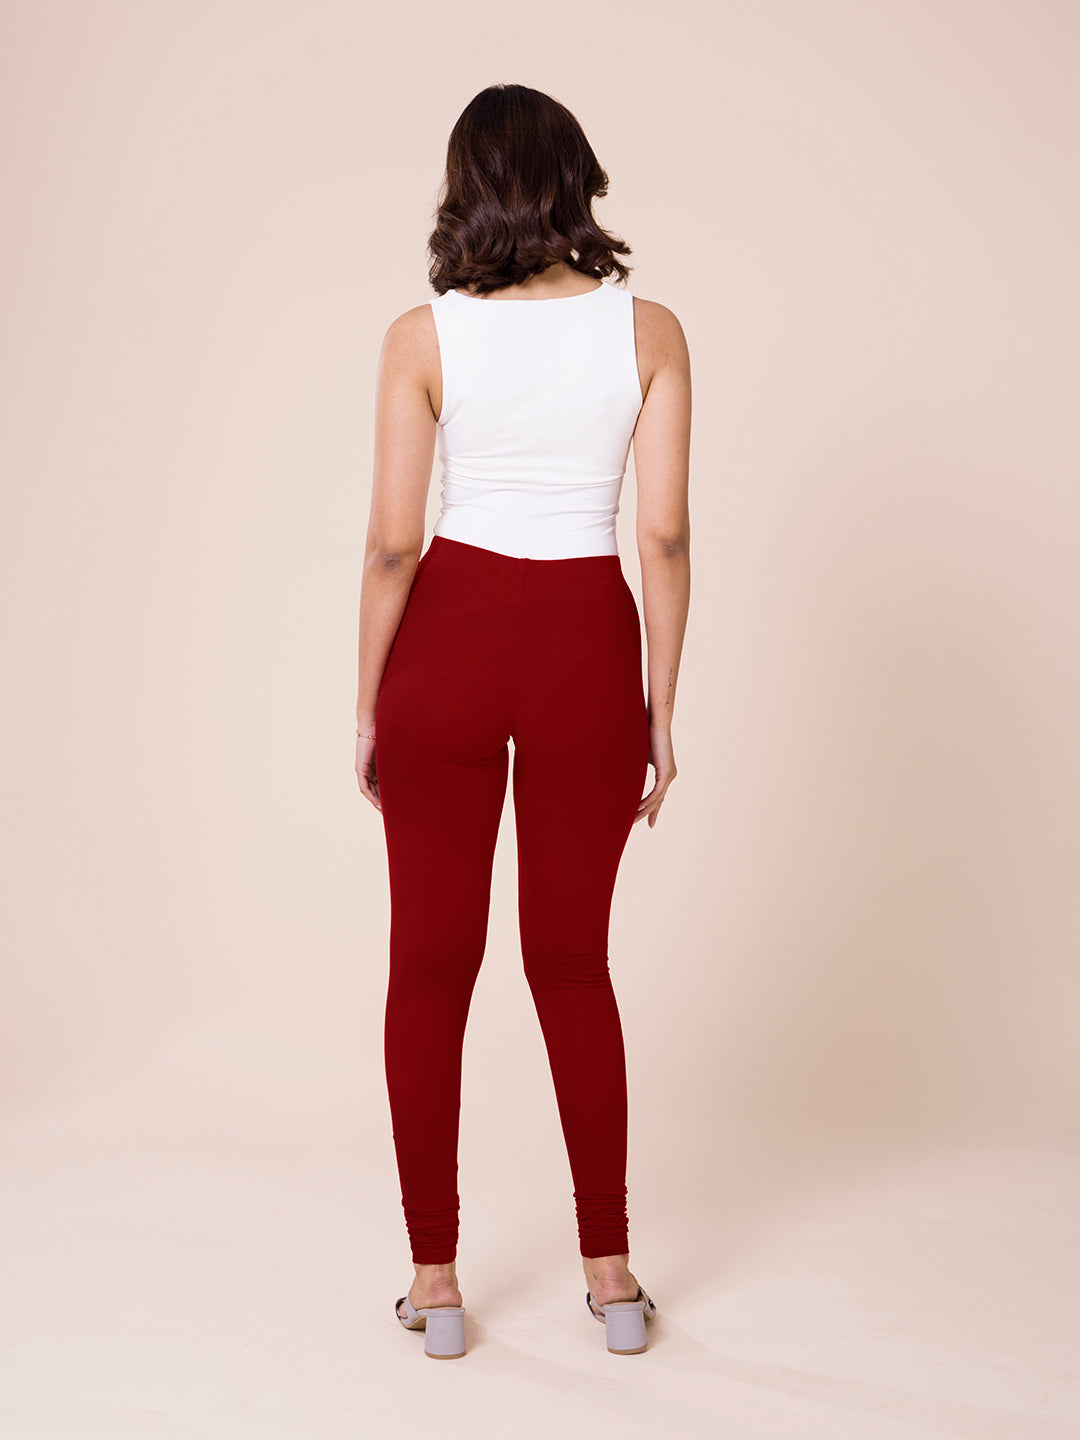 The Fashion Revolution Unveiled; The Rise of Leggings, as a Must Have